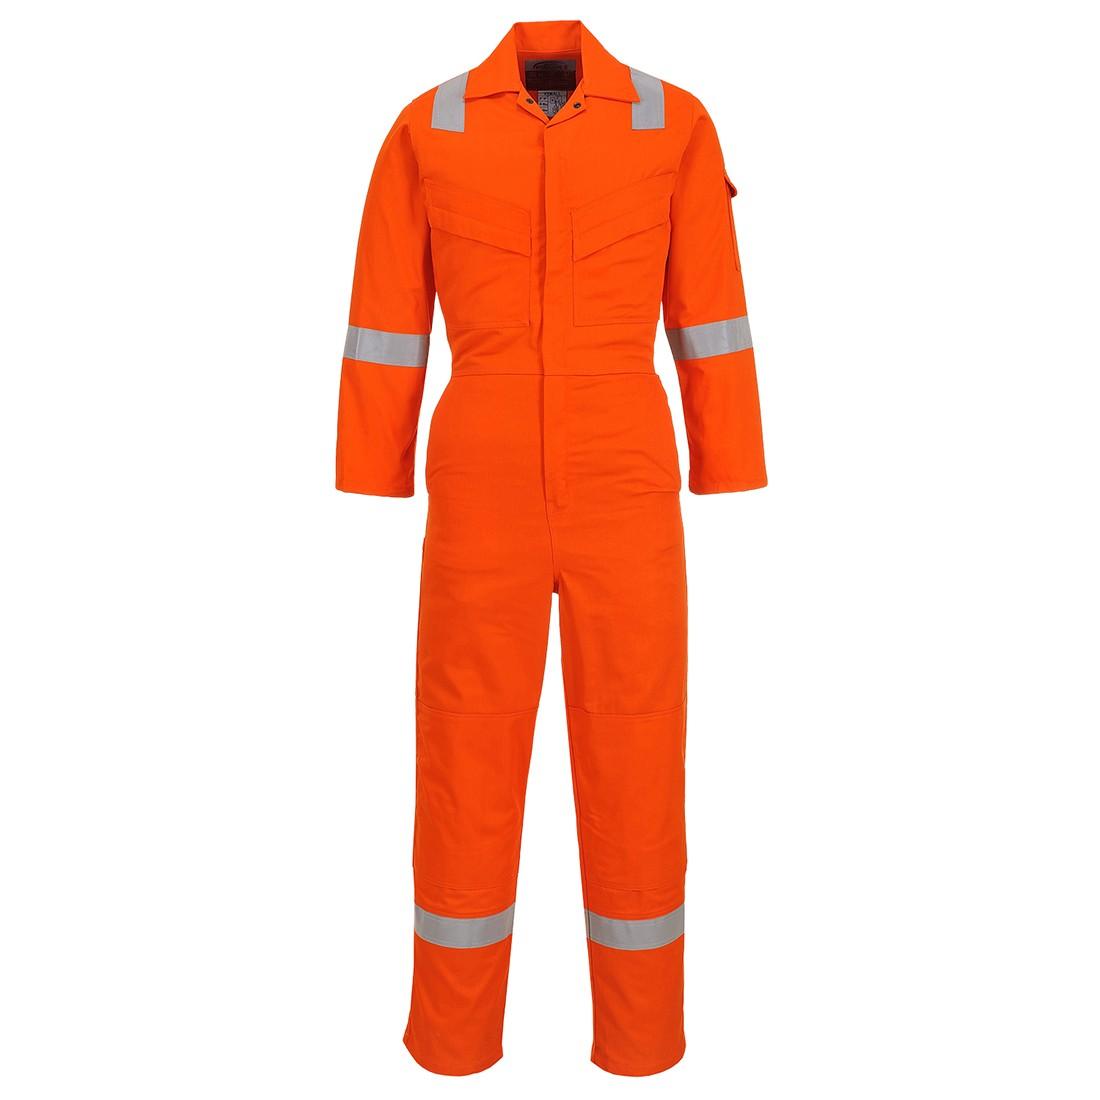 sUw Bizflame Plus Flame Resist Light Weight Anti-Static Coverall 280g 